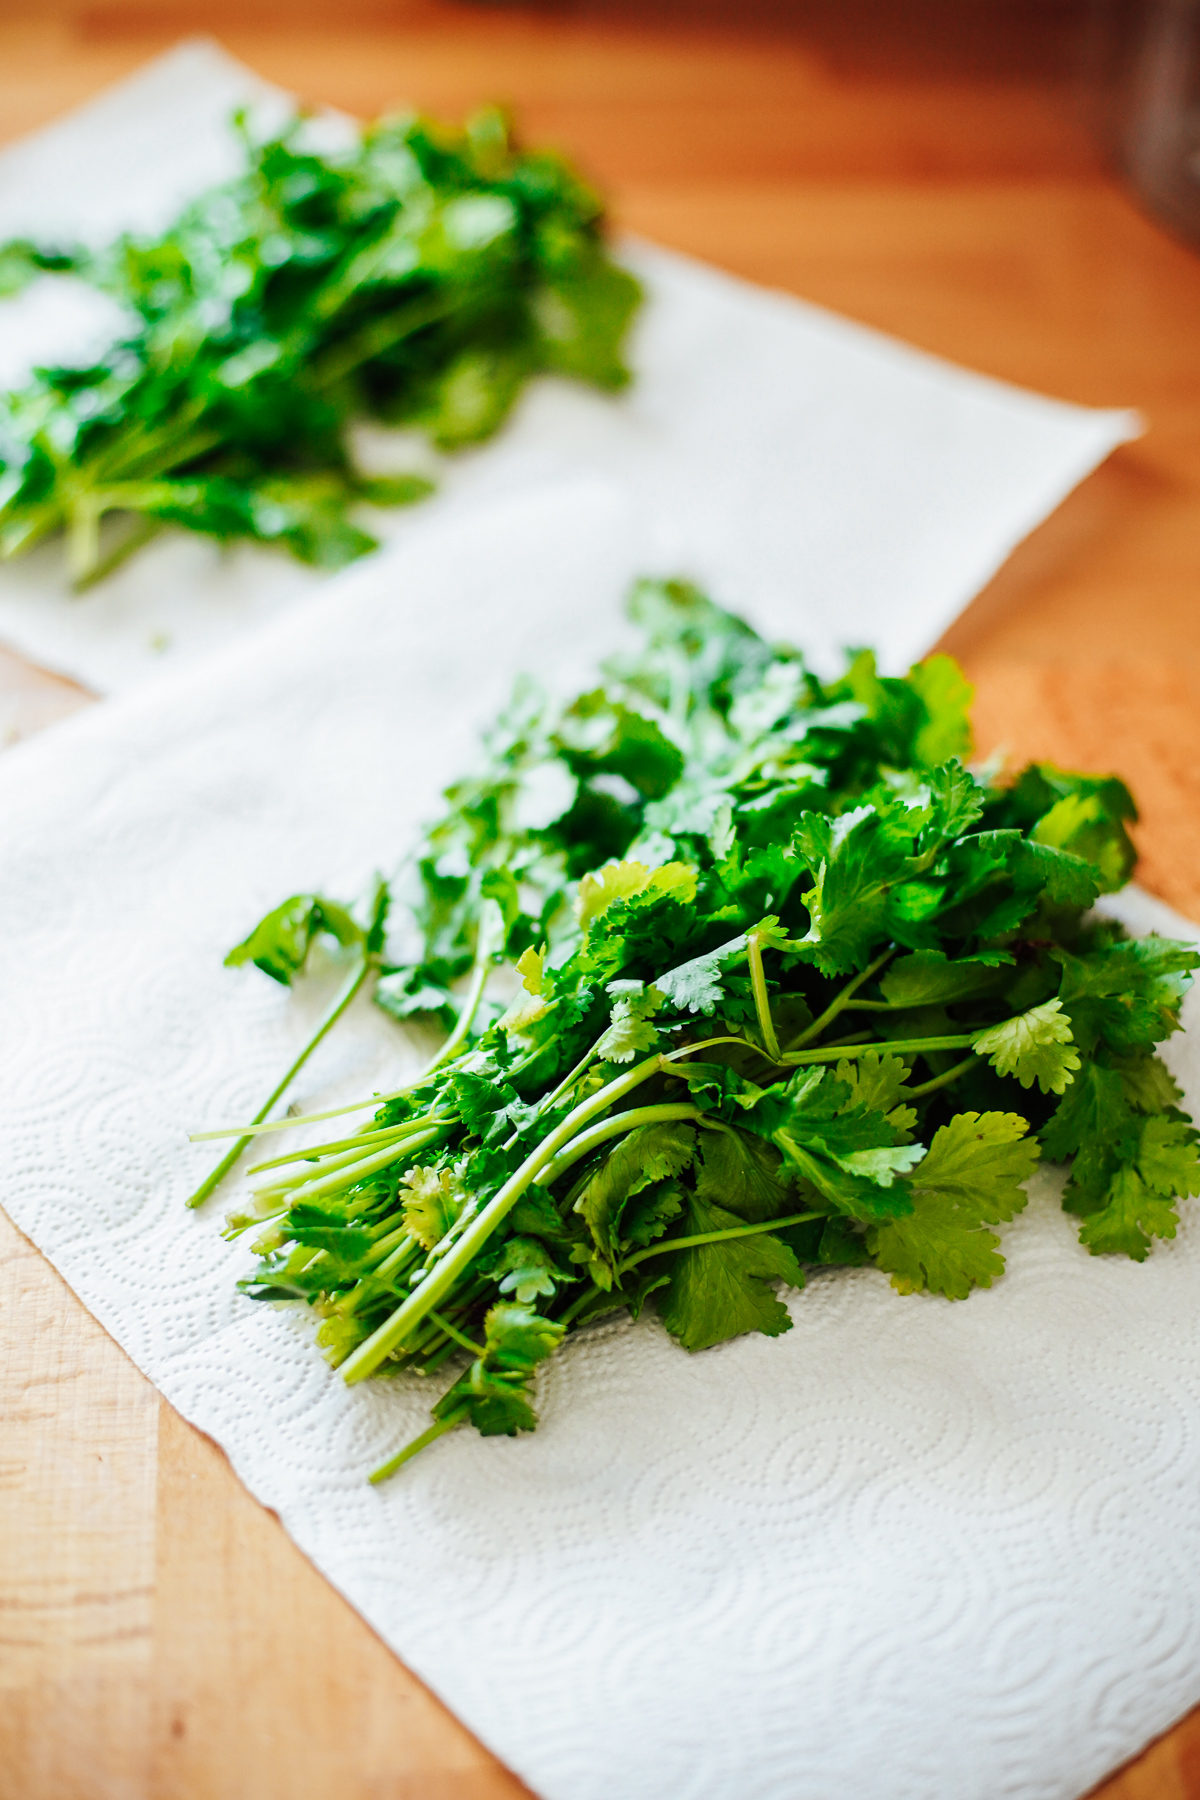 How to Store Cilantro (Best Ways) & Keep Fresh in the Fridge